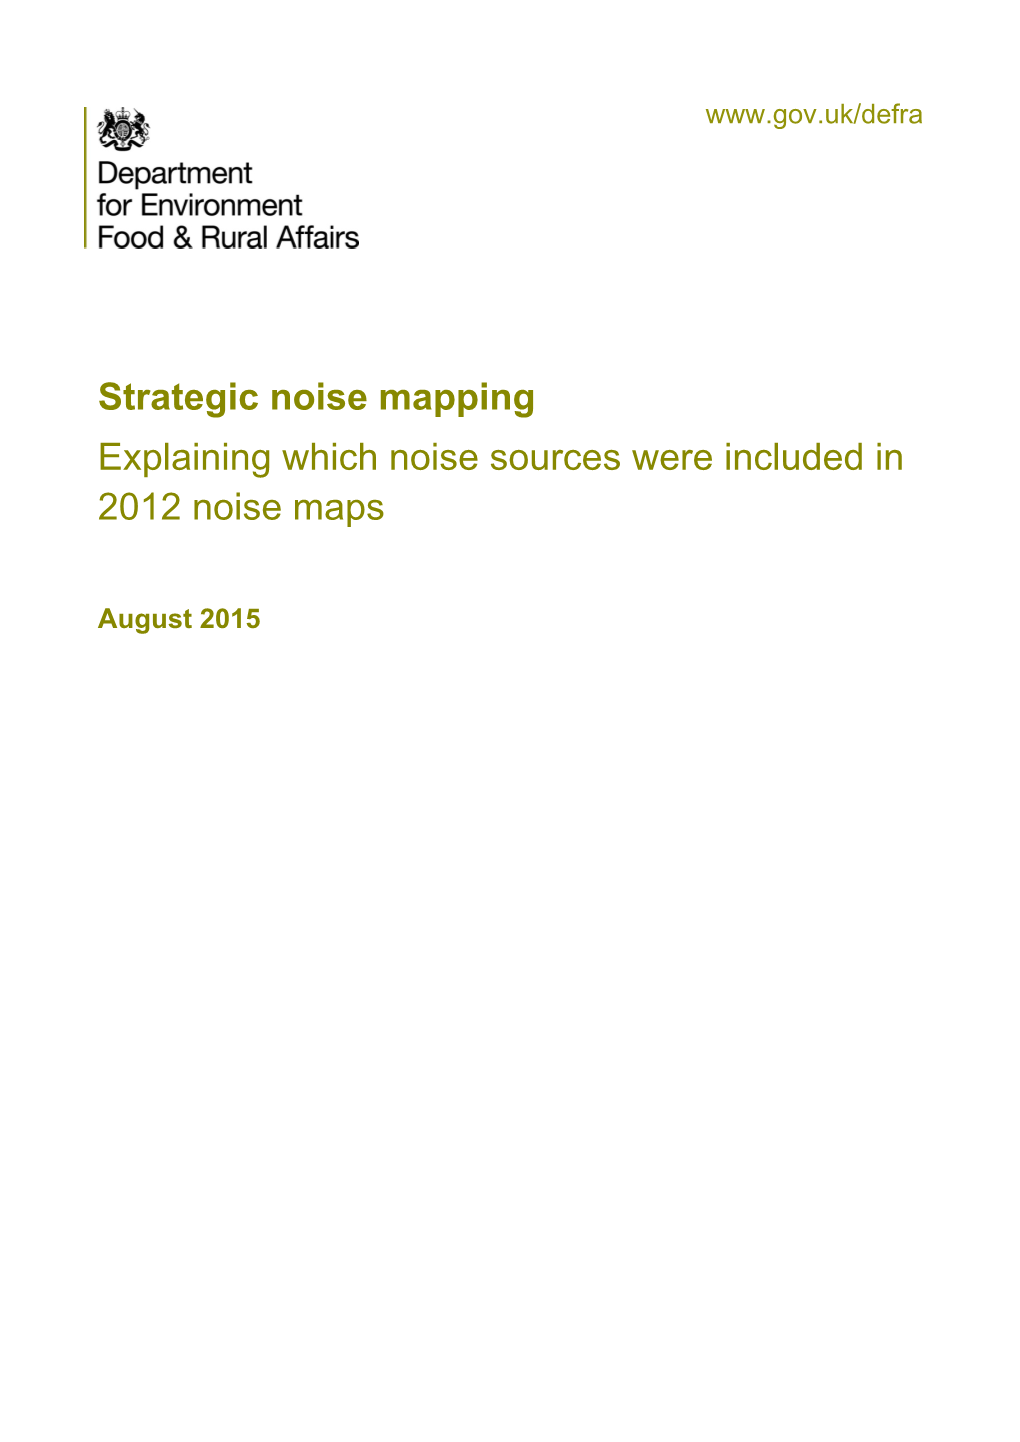 Noise Sources Used in Strategic Noise Mapping 2012